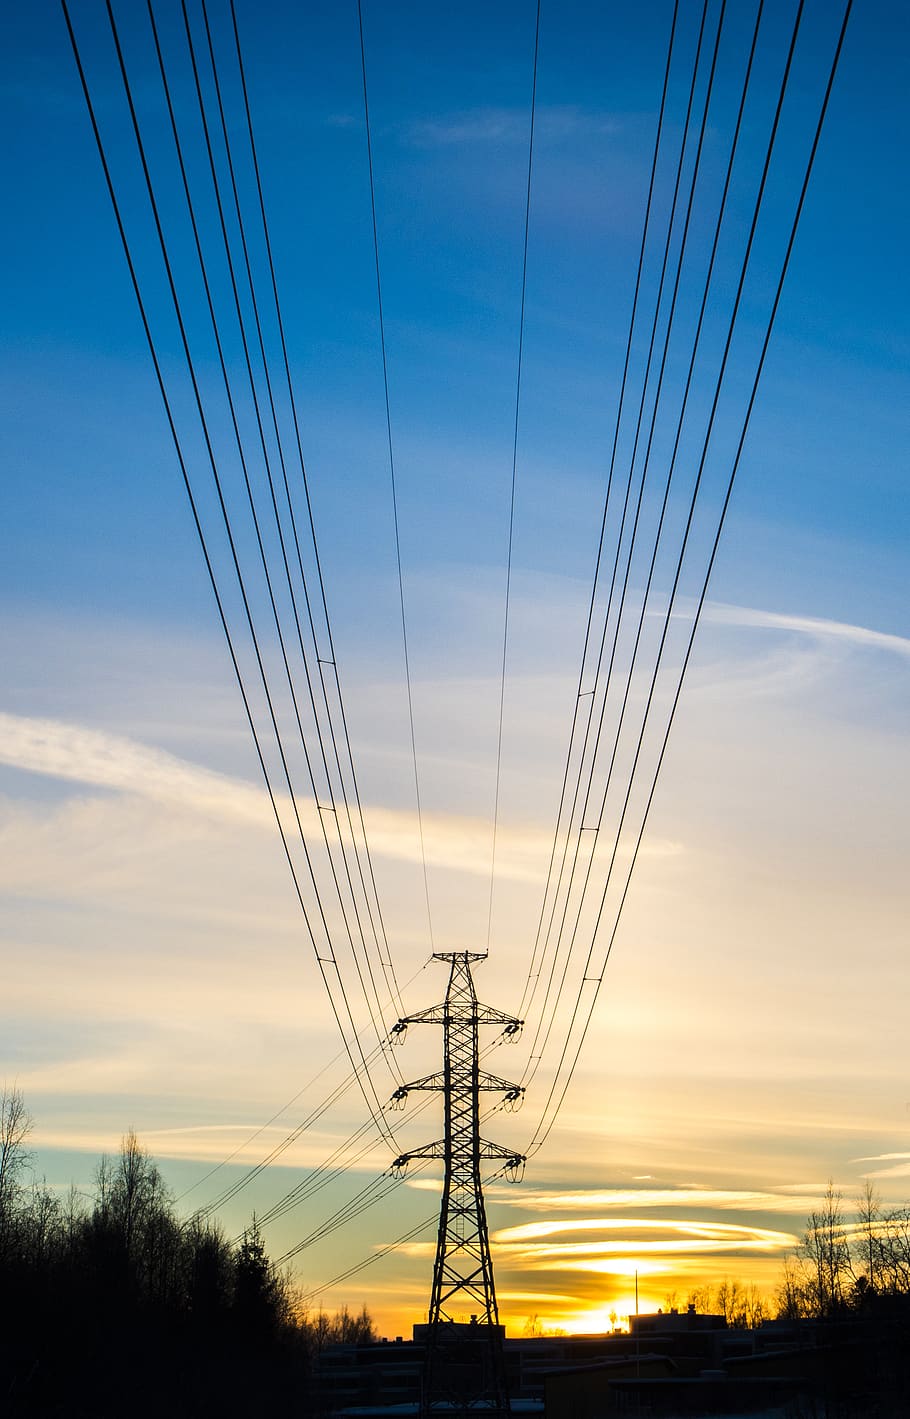 power lines, cable, boat, transportation, vehicle, electric transmission tower